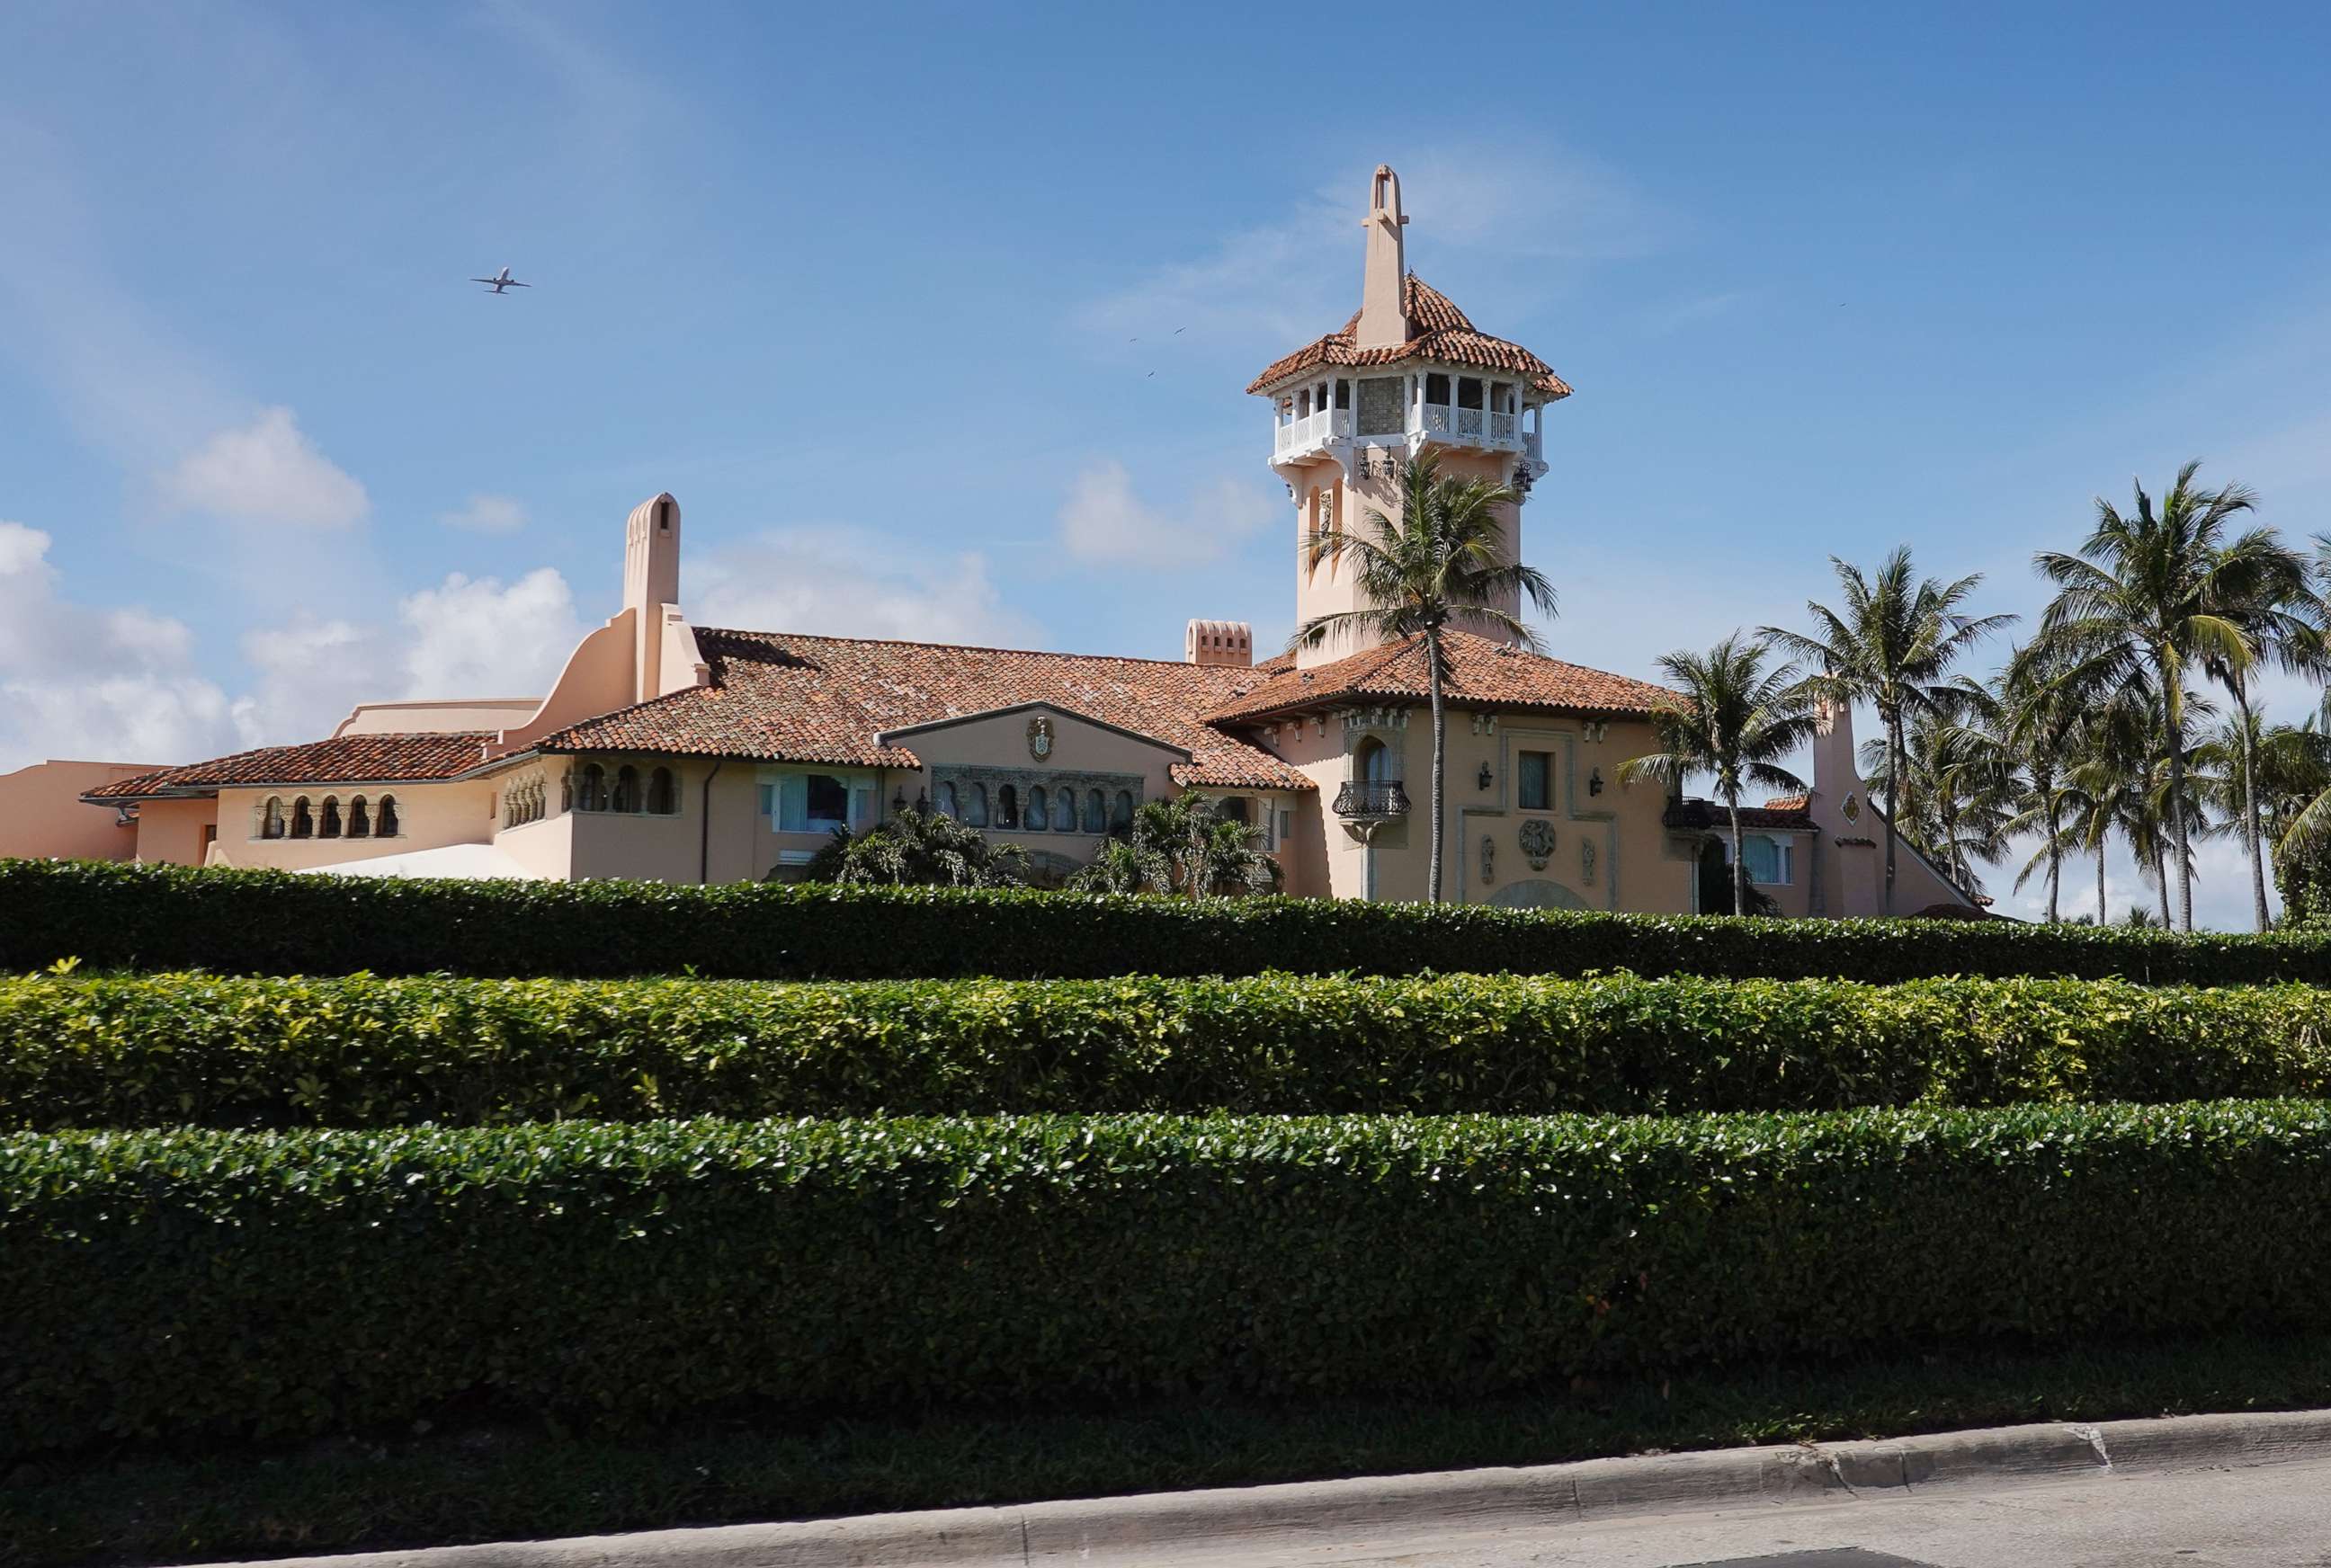 PHOTO: In this Feb. 10, 2021, file photo, former President Trump's Mar-a-Lago resort is seen in Palm Beach, Fla.